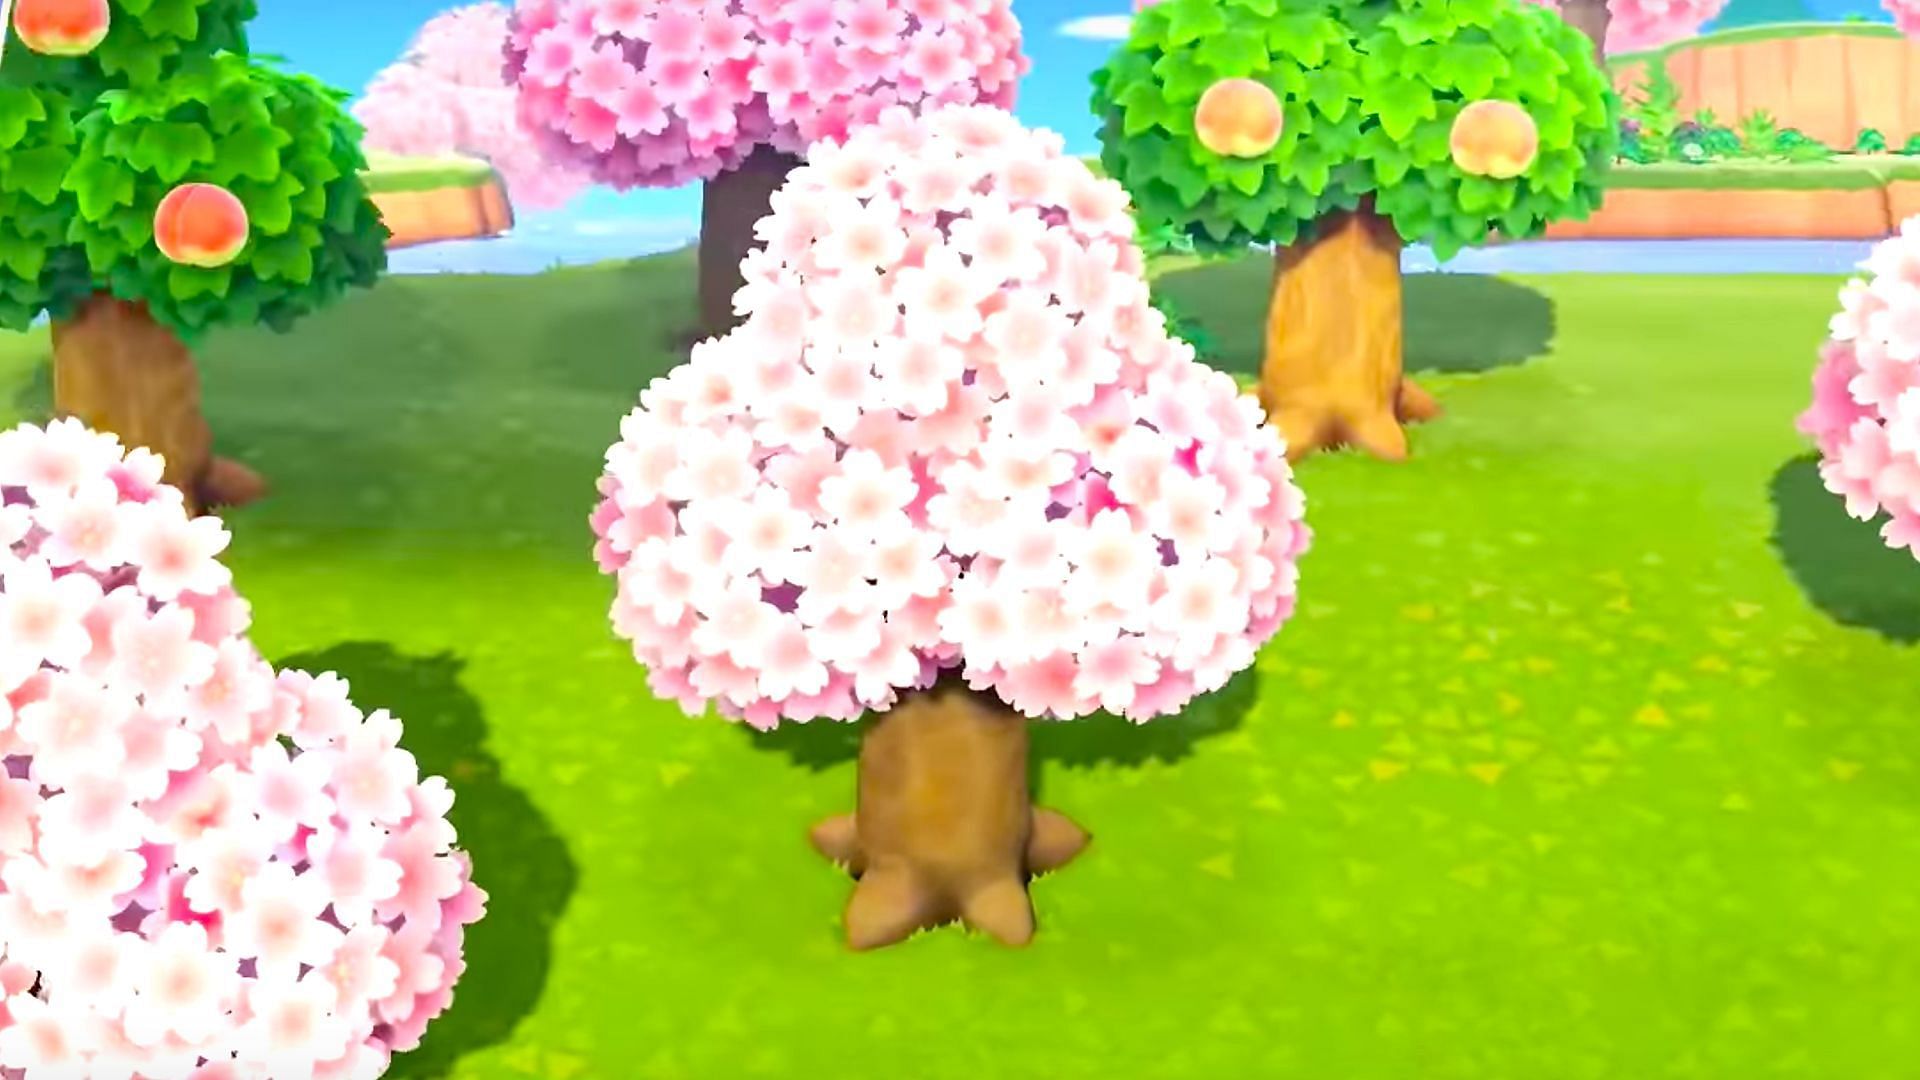 Cherry blossom season in Animal Crossing New Horizons Dates, features, items and more